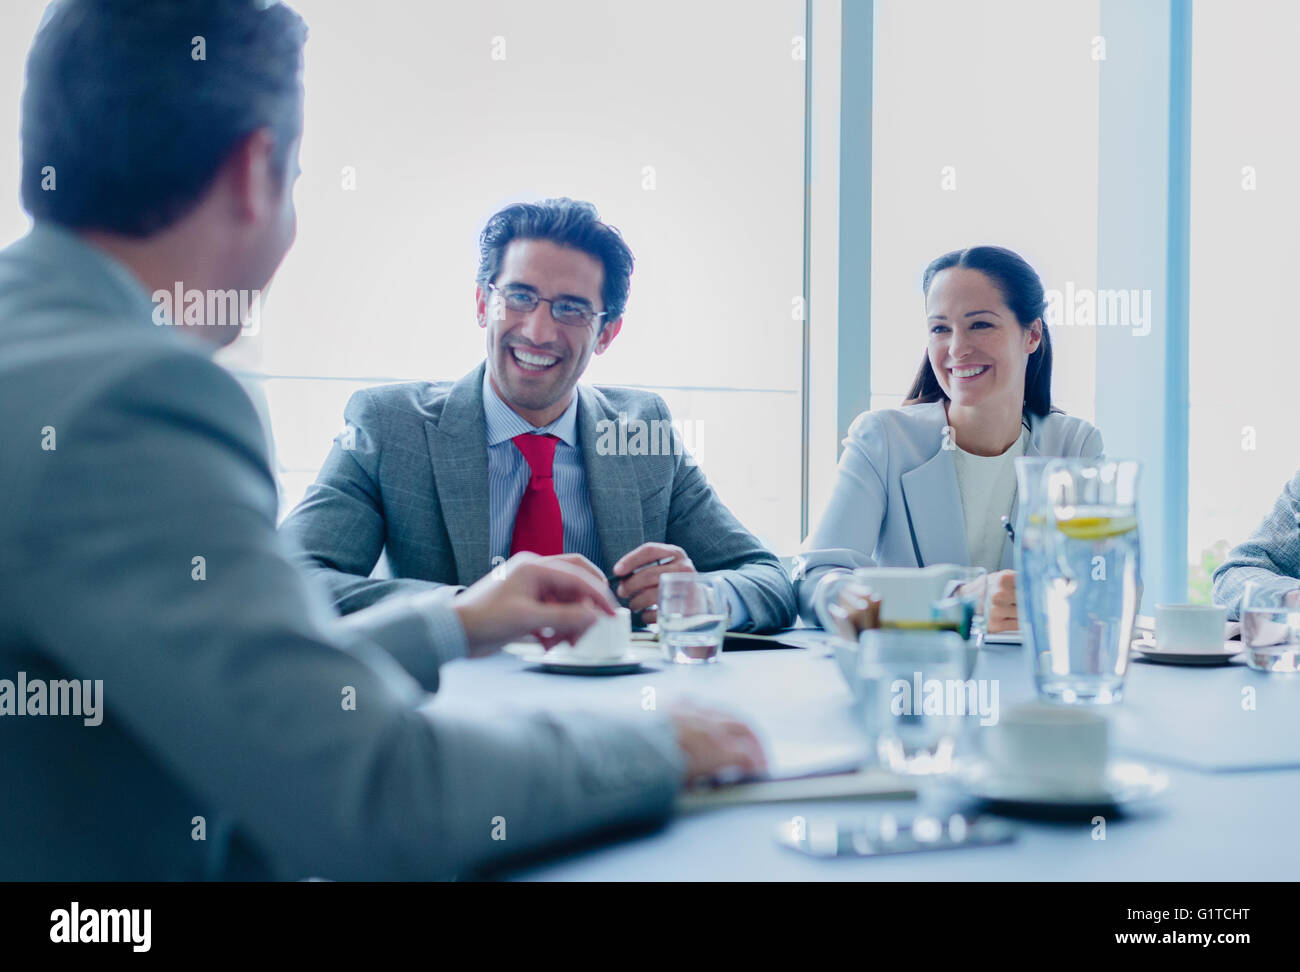 Smiling business people talking in conference room Stock Photo